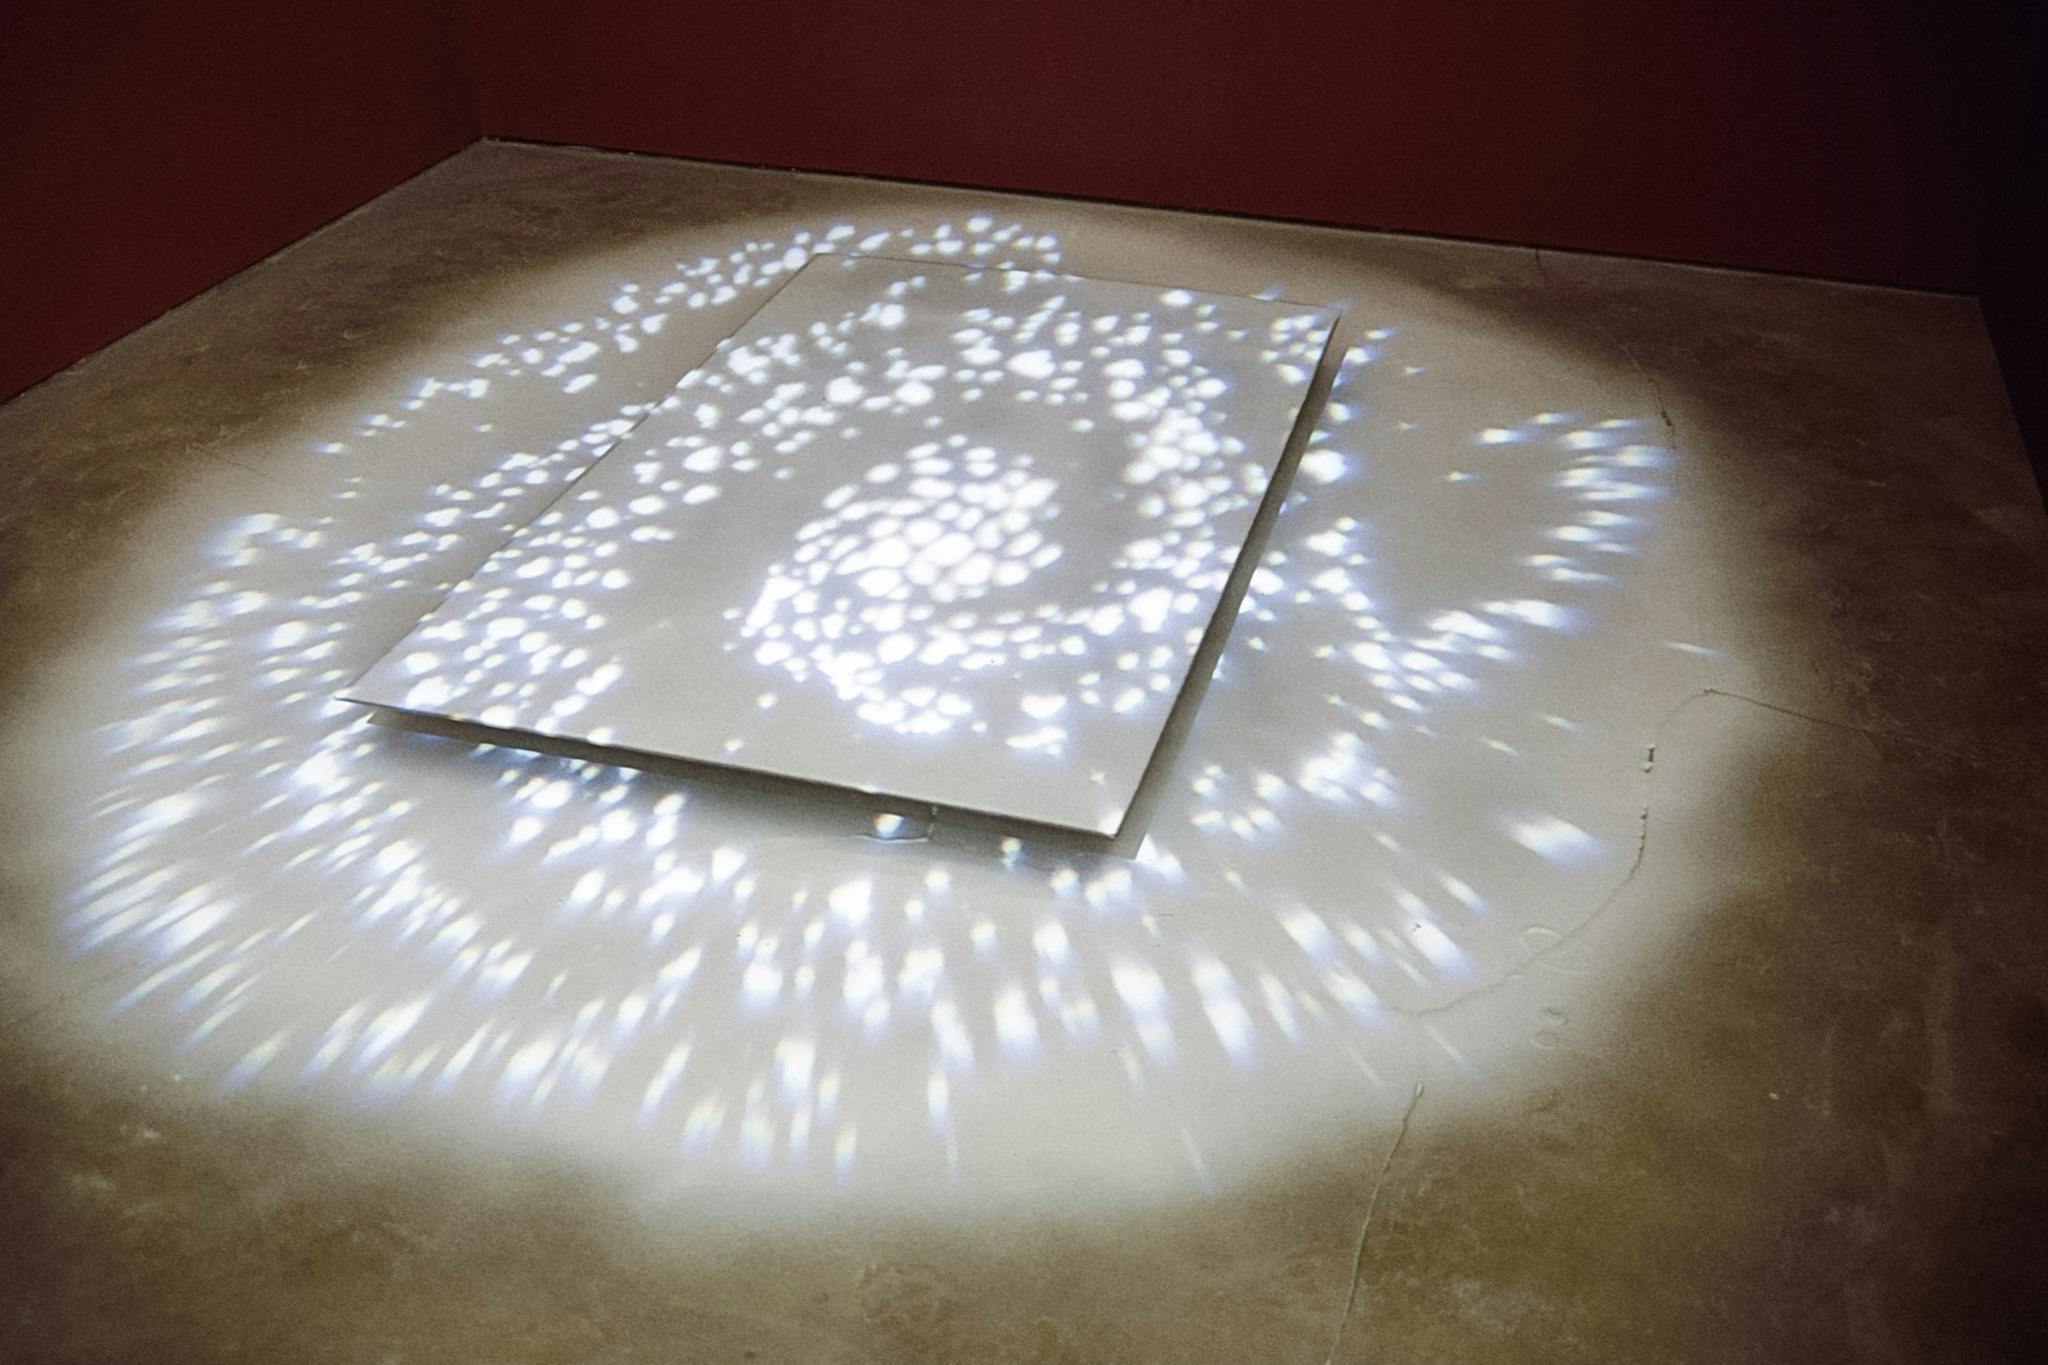 An installation on the white gallery floor consists of a white panel and a projection from the ceiling. A white spiral shape is projected over the panel. The gallery walls are painted in red. 